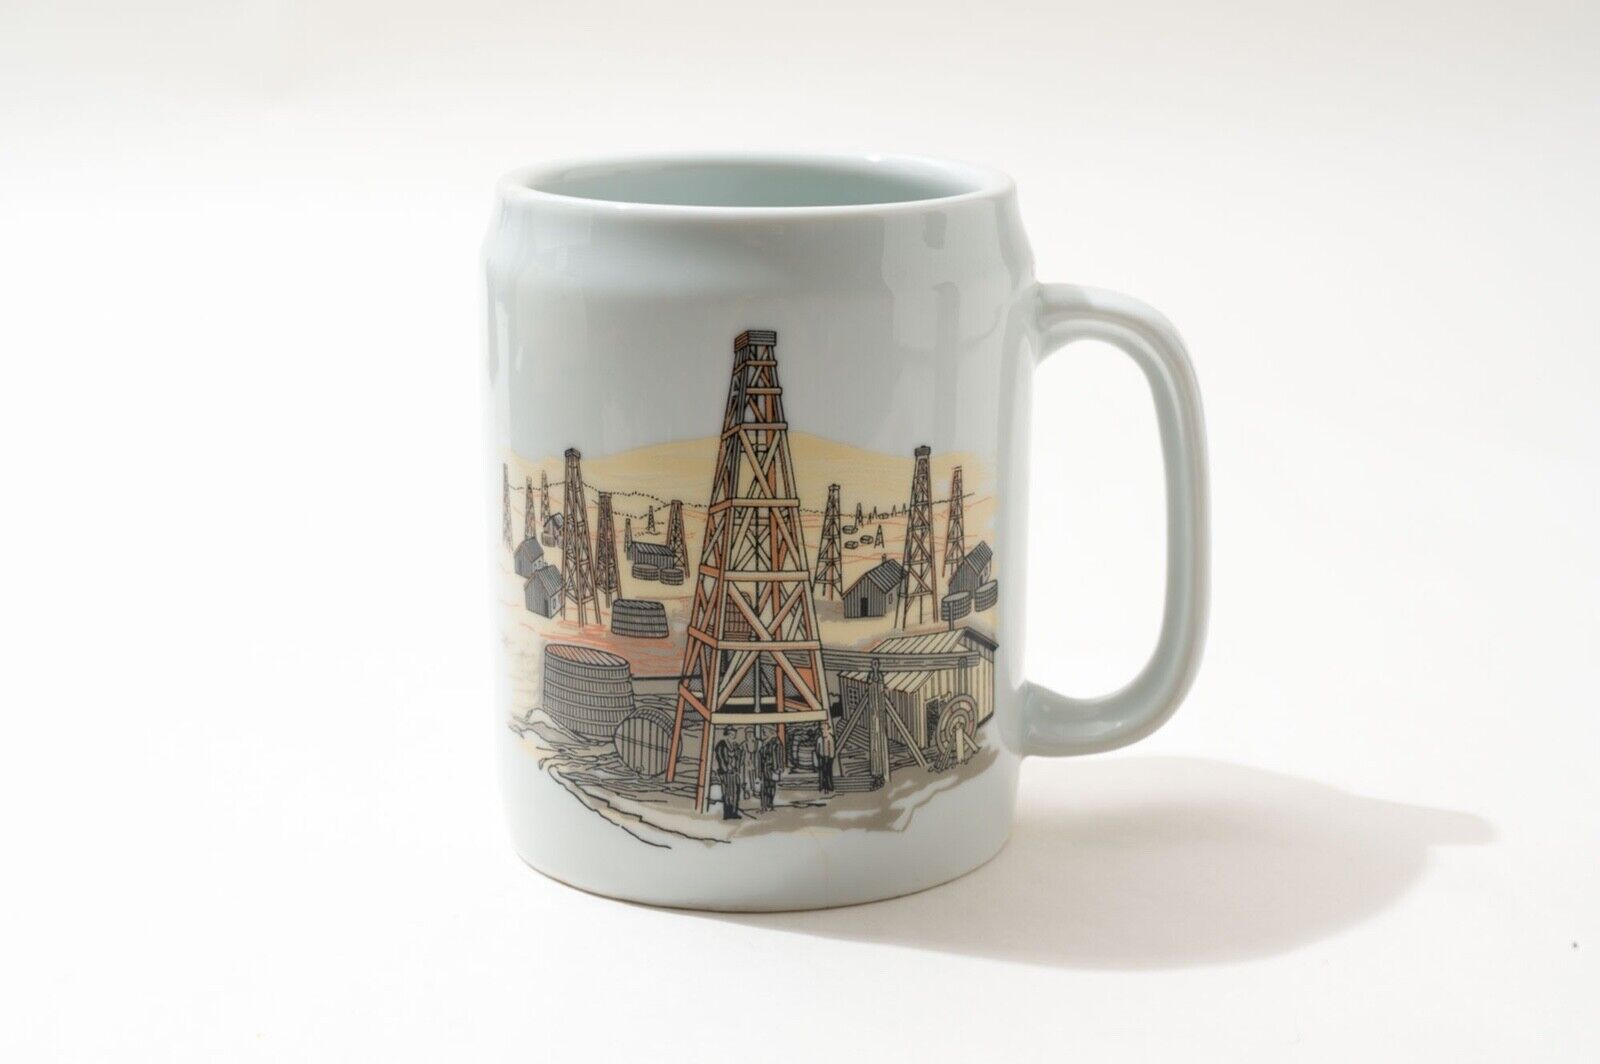 Vintage Quaker State Mug, Early Oil Field